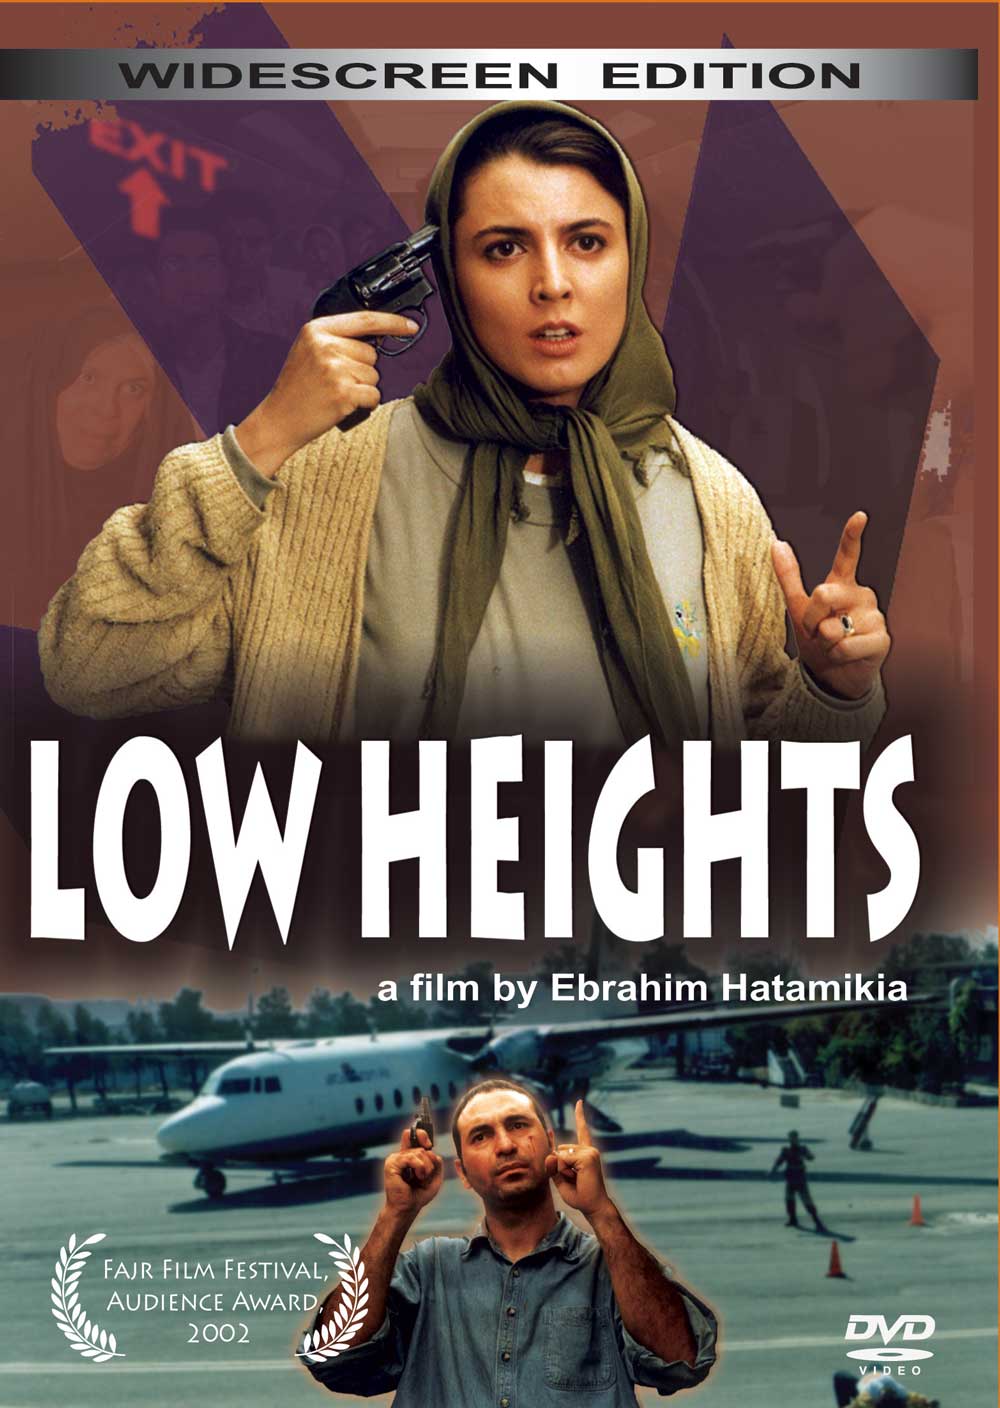 Low height